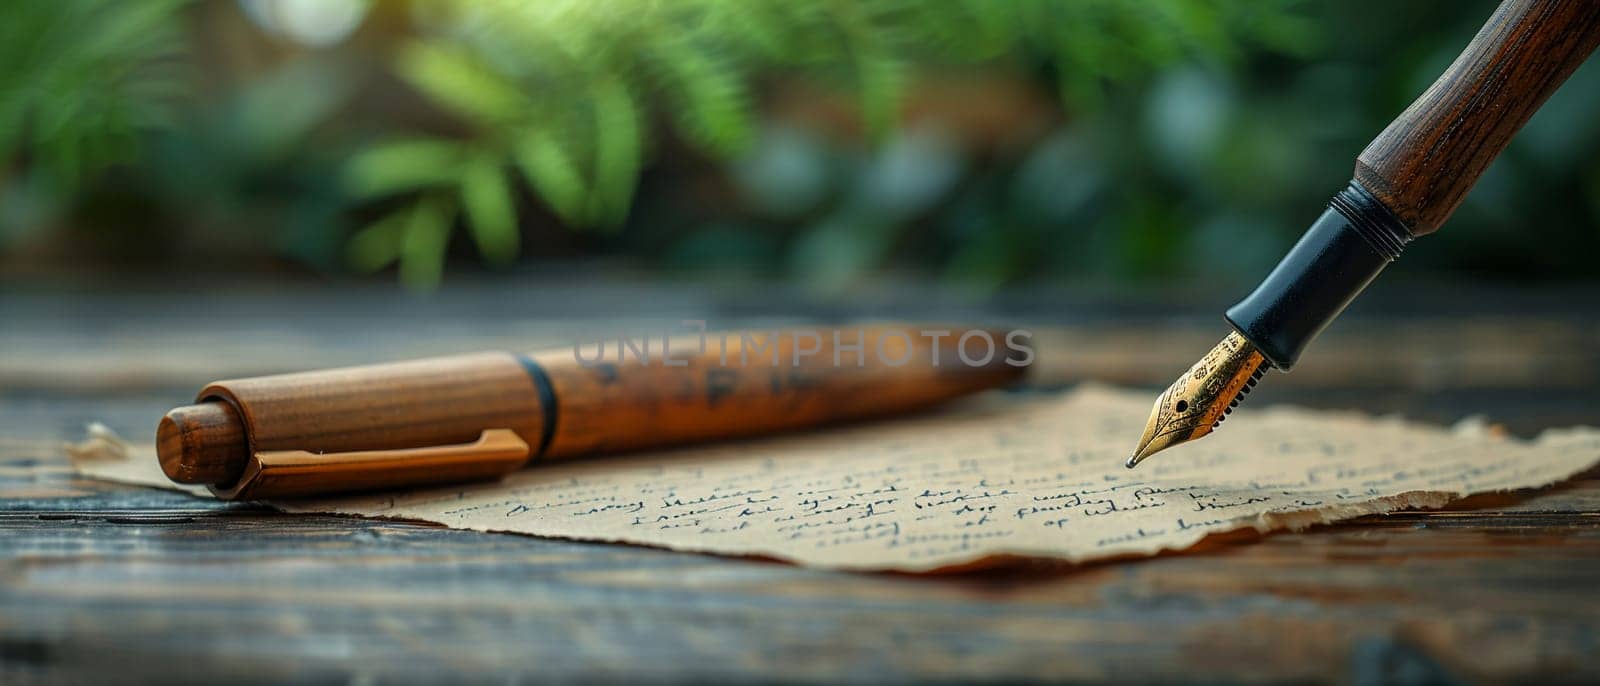 Hand writing a heartfelt letter, depicting personal communication and emotional expression.